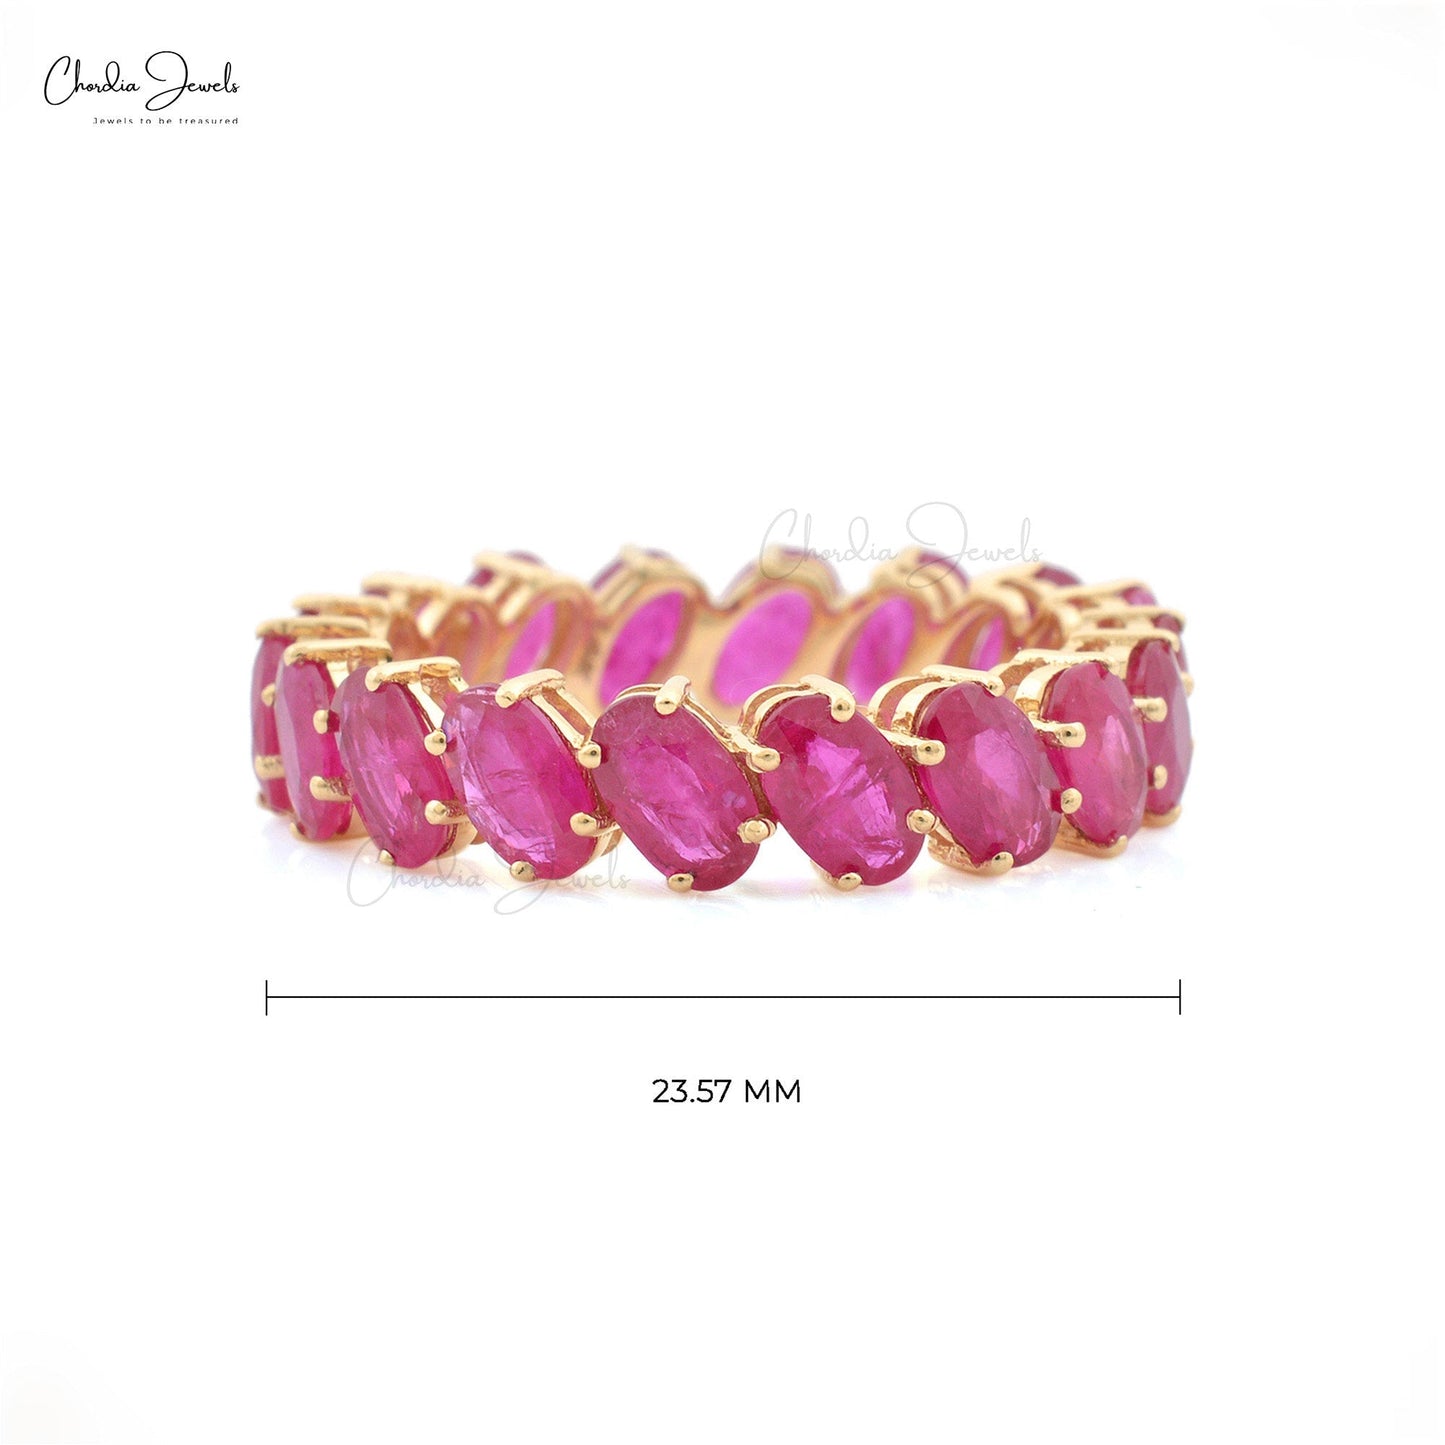 Ruby Eternity Band Ring, Oval Cut Ruby Ring in 14k Solid Yellow Gold July Birthstone